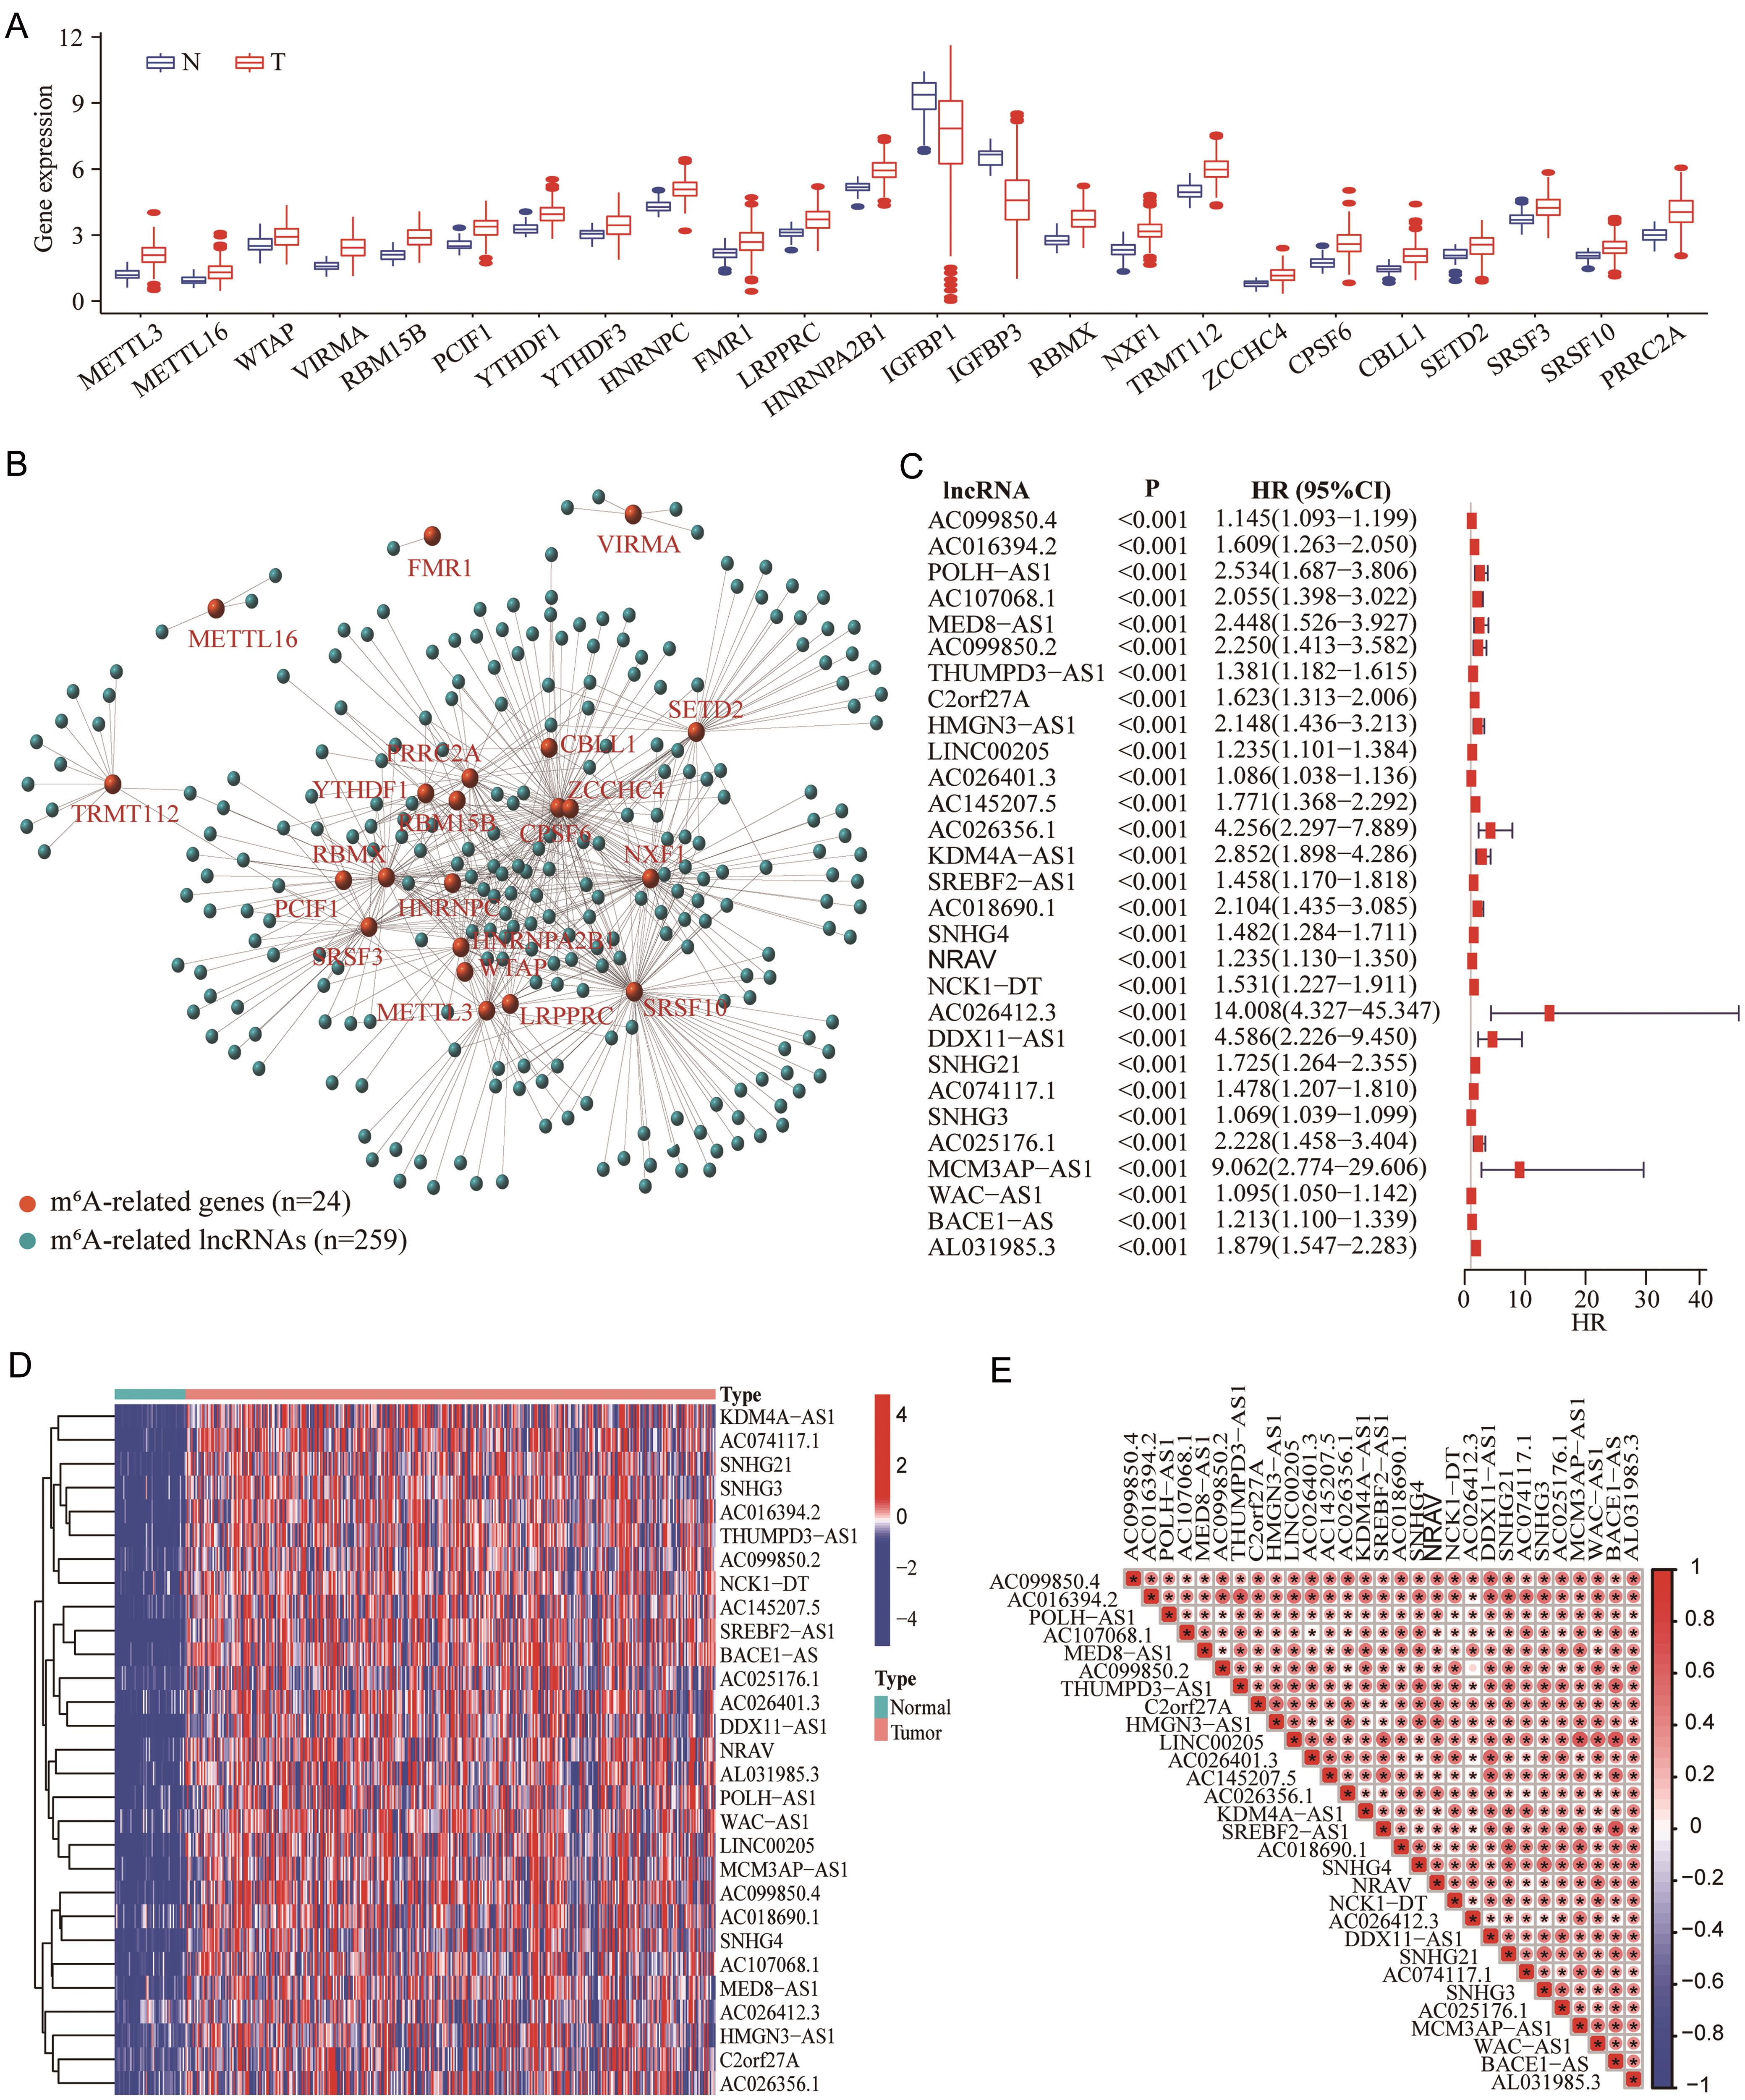 Identification of m<sup>6</sup>A-related lncRNAs with prognostic significance in HCC.